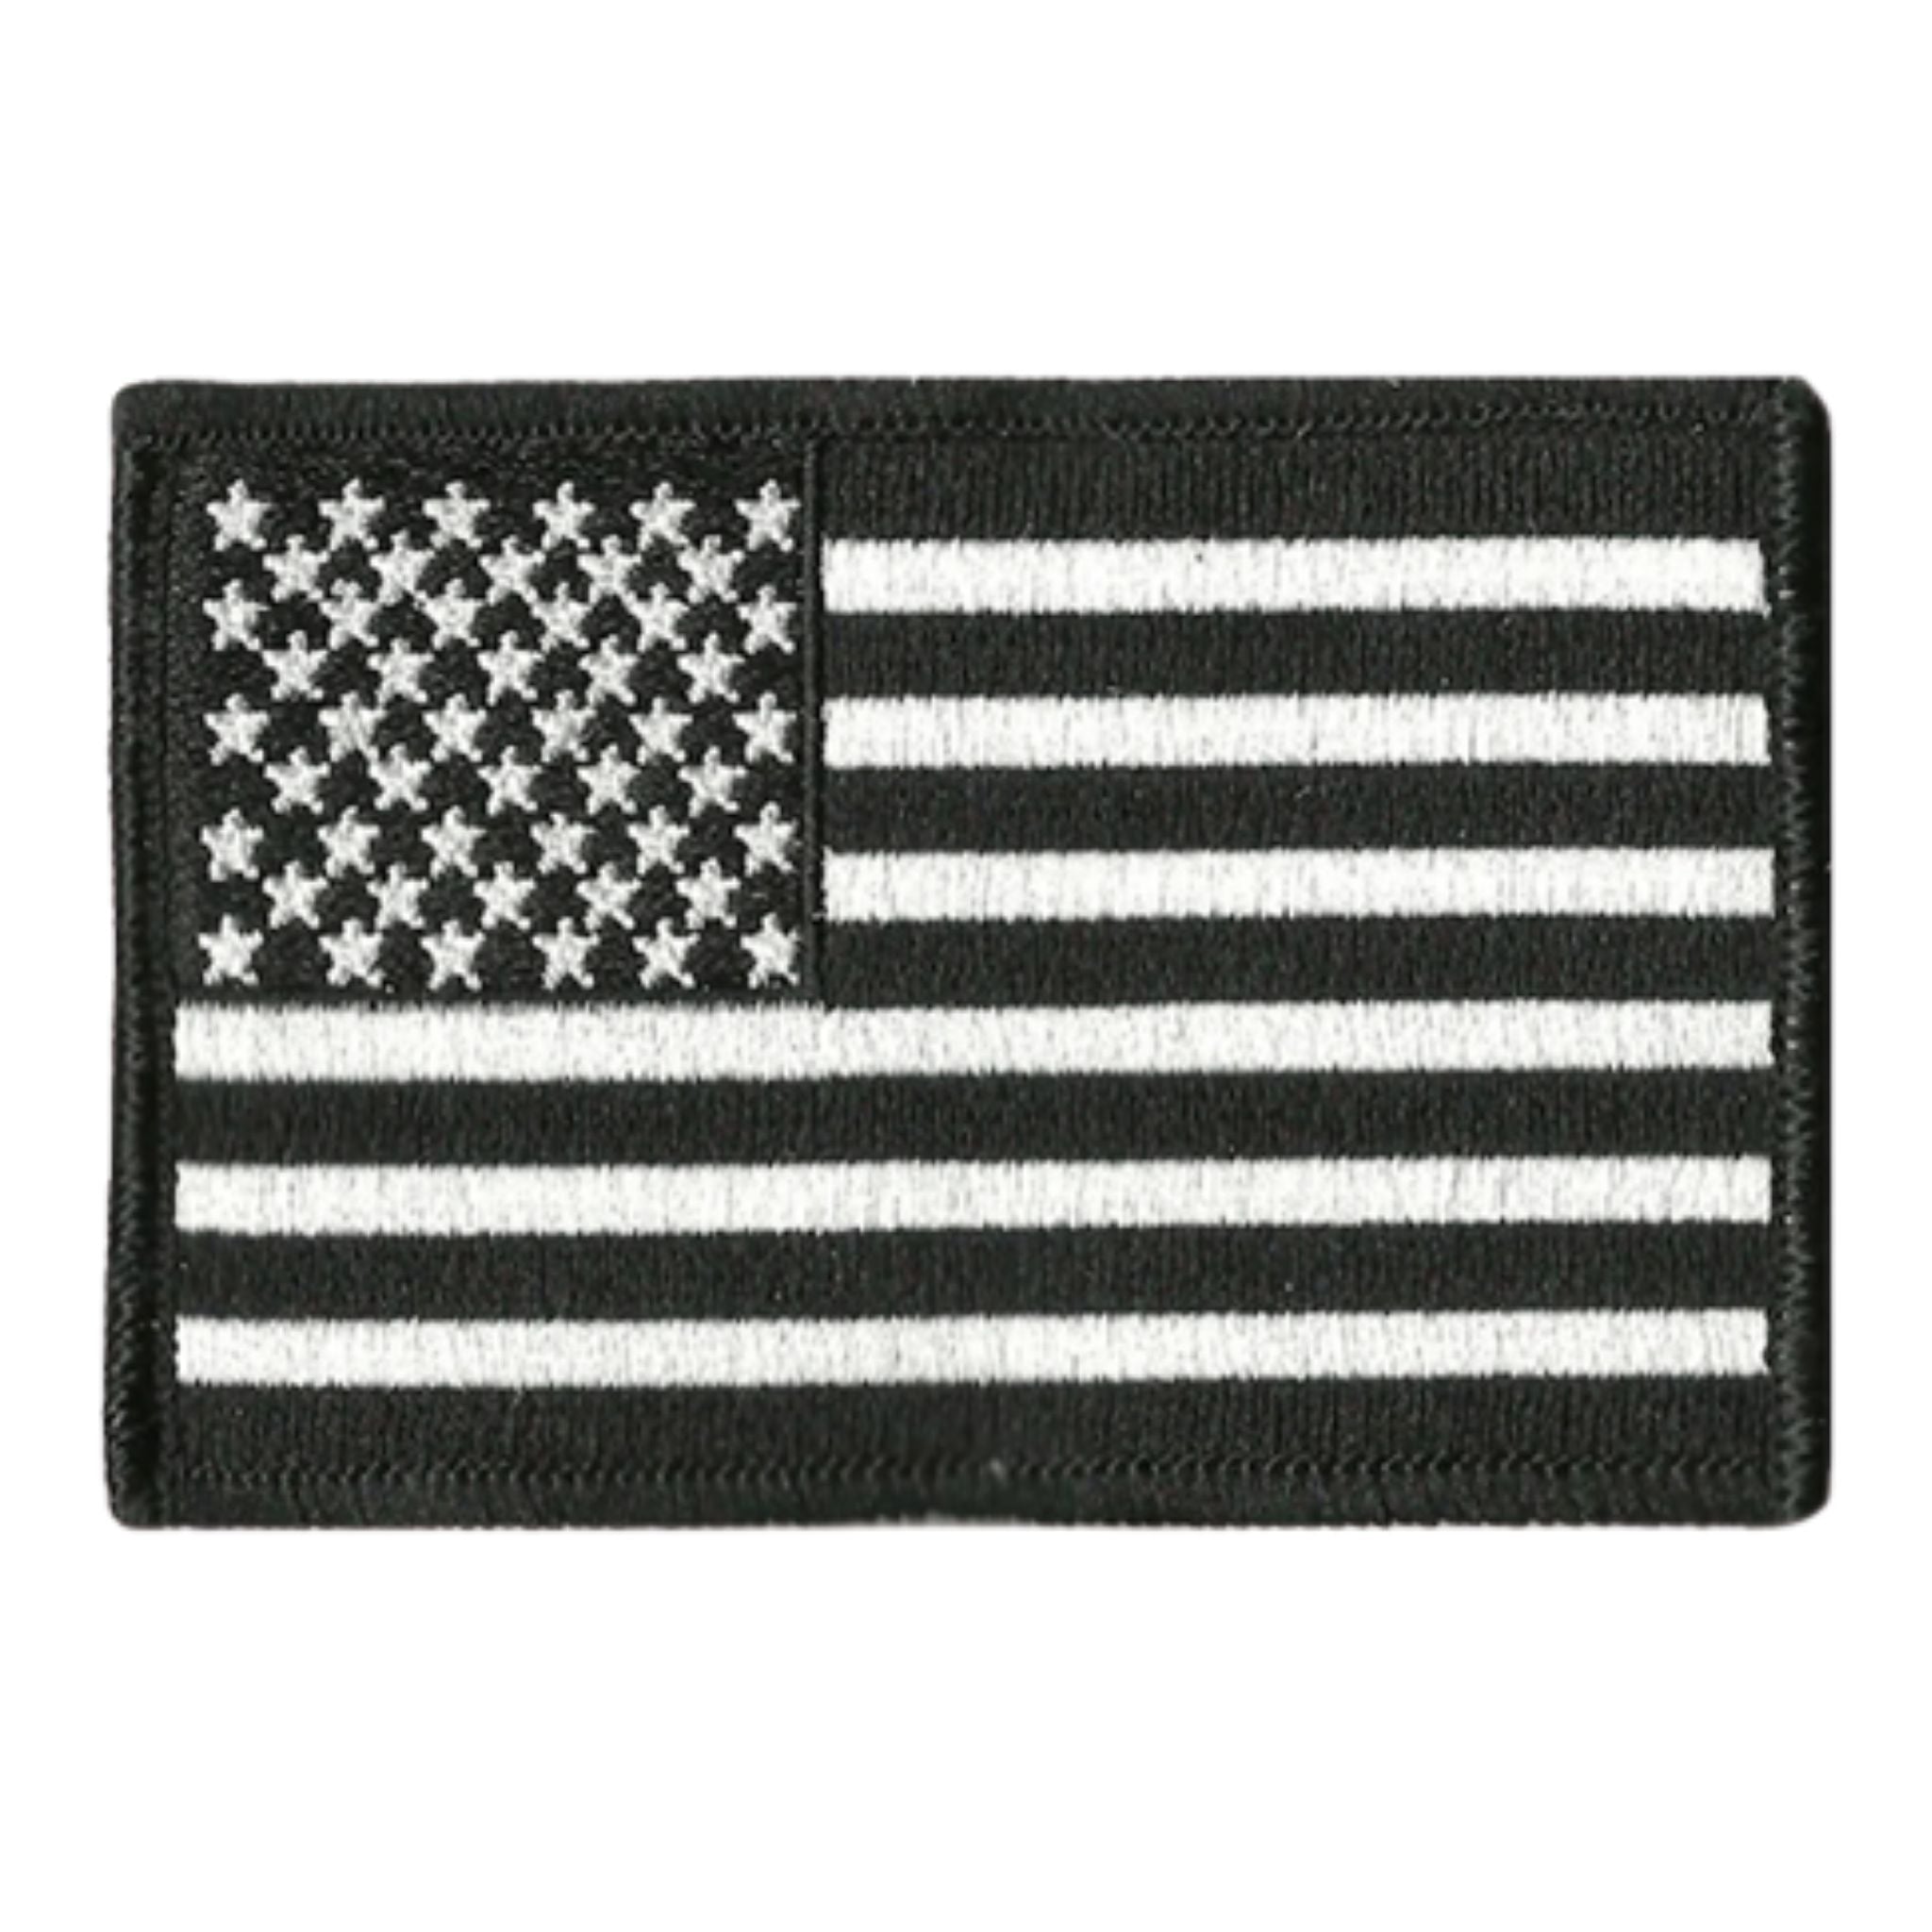 black and white american flag png